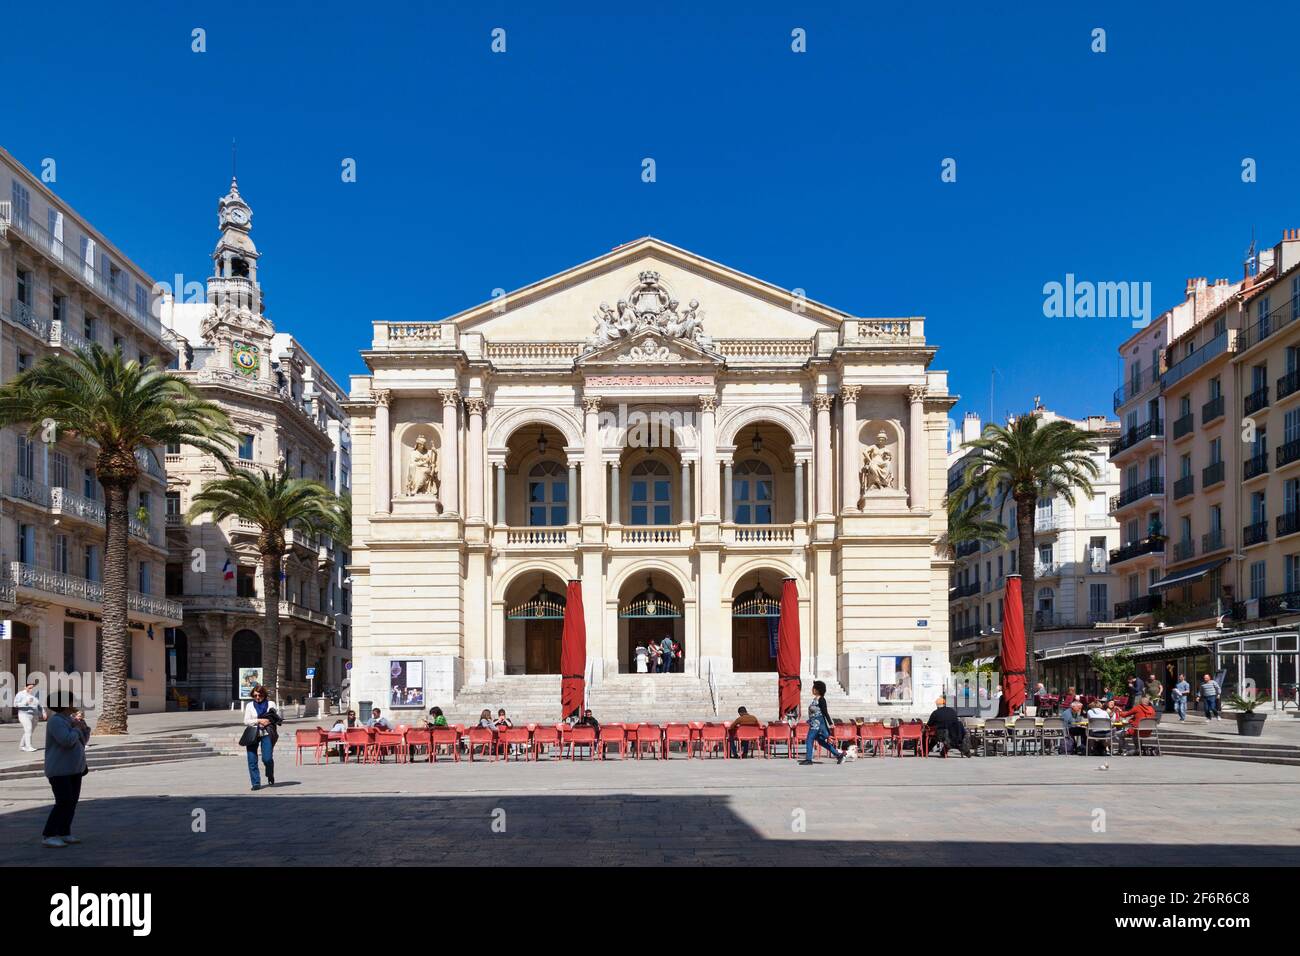 Toulon, France - March 24 2019: The Toulon Opera (French: L'opéra de Toulon), is the second-largest opera house in France. Stock Photo